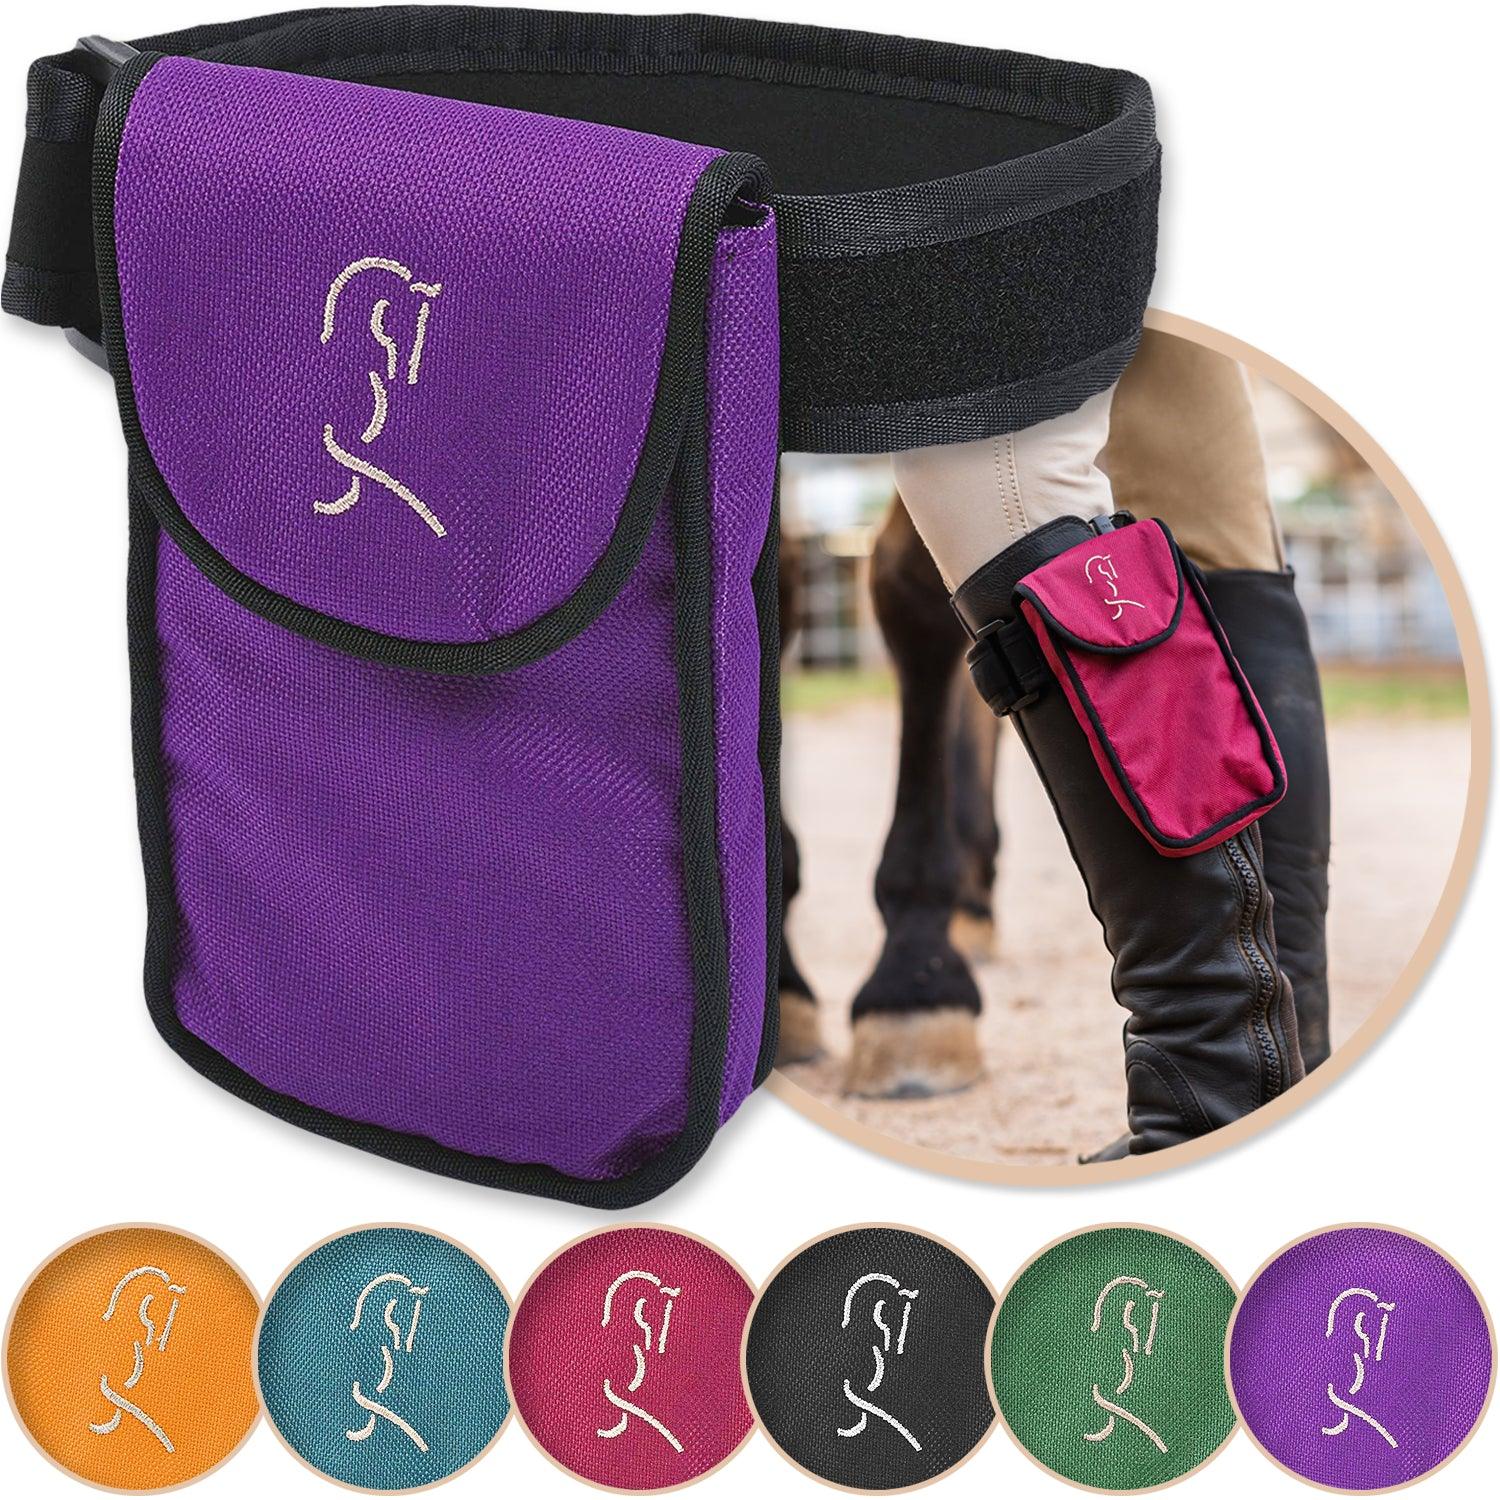 Purple equestrian cell phone holder shown with a variety of colors